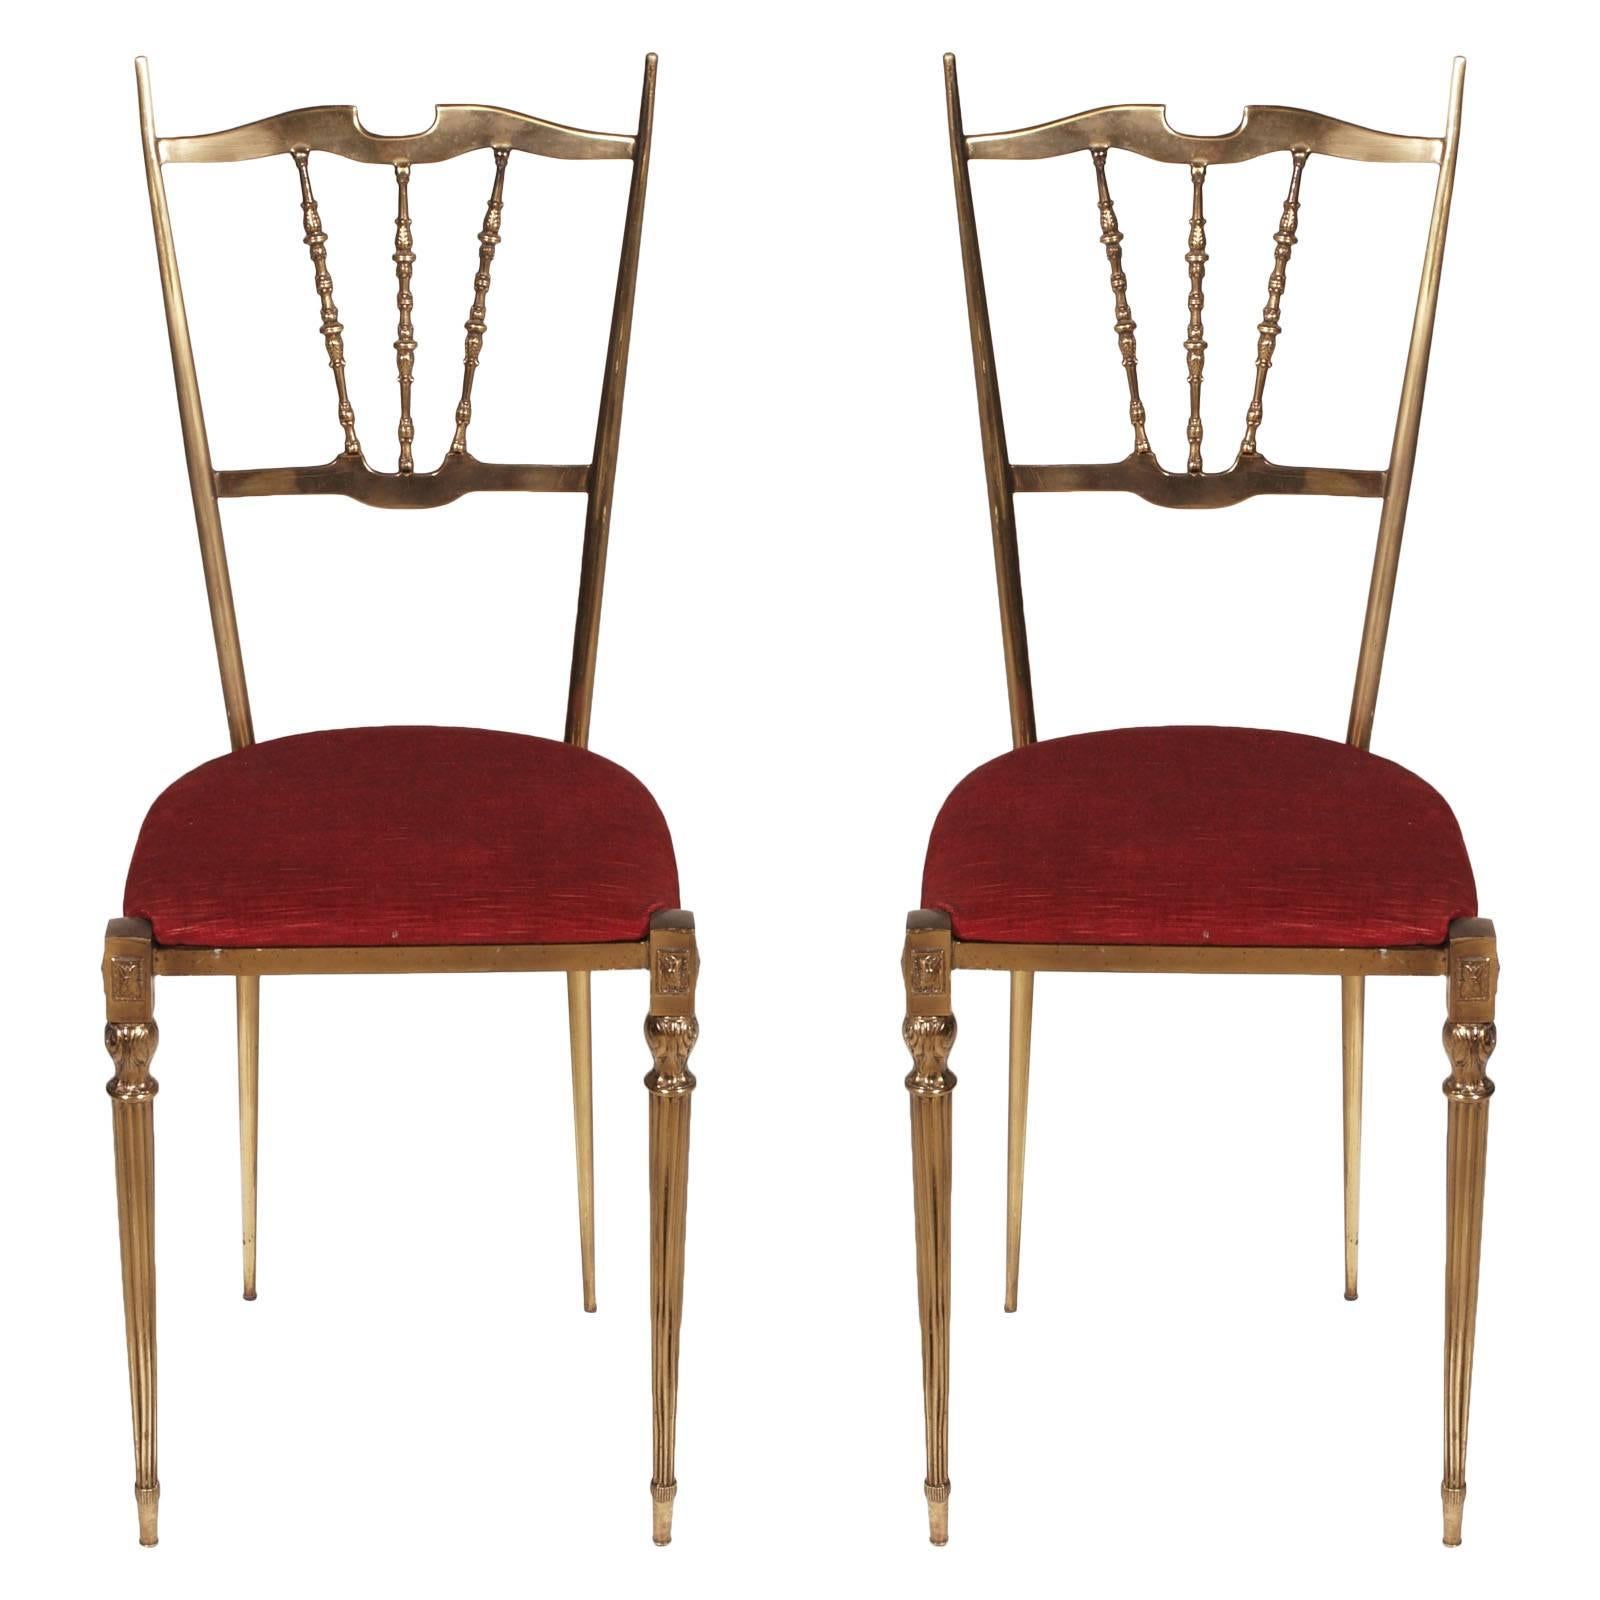 We can sell the pieces separately
Midcentury Art Nouveau brass entrance, console, mirror, chairs, Gio Ponti style
Structural parts in burnished brass, circa 1930.
Seat of the two chairs in original red brown velvet in good condition
Top of the